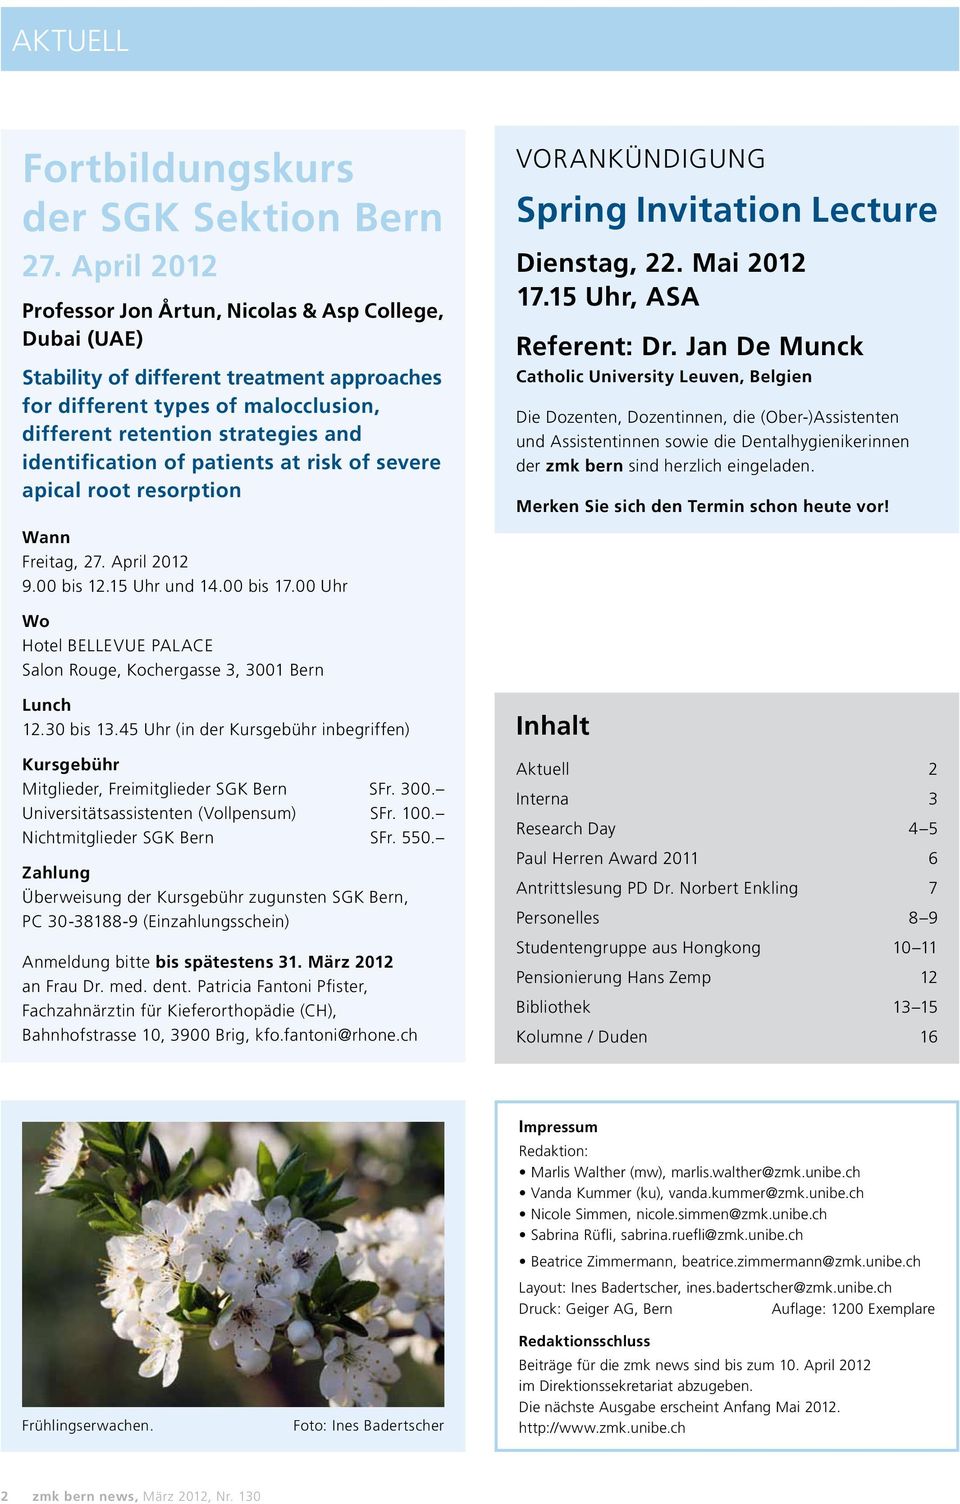 of patients at risk of severe apical root resorption Vorankündigung Spring Invitation Lecture Dienstag, 22. Mai 2012 17.15 Uhr, ASA Referent: Dr.